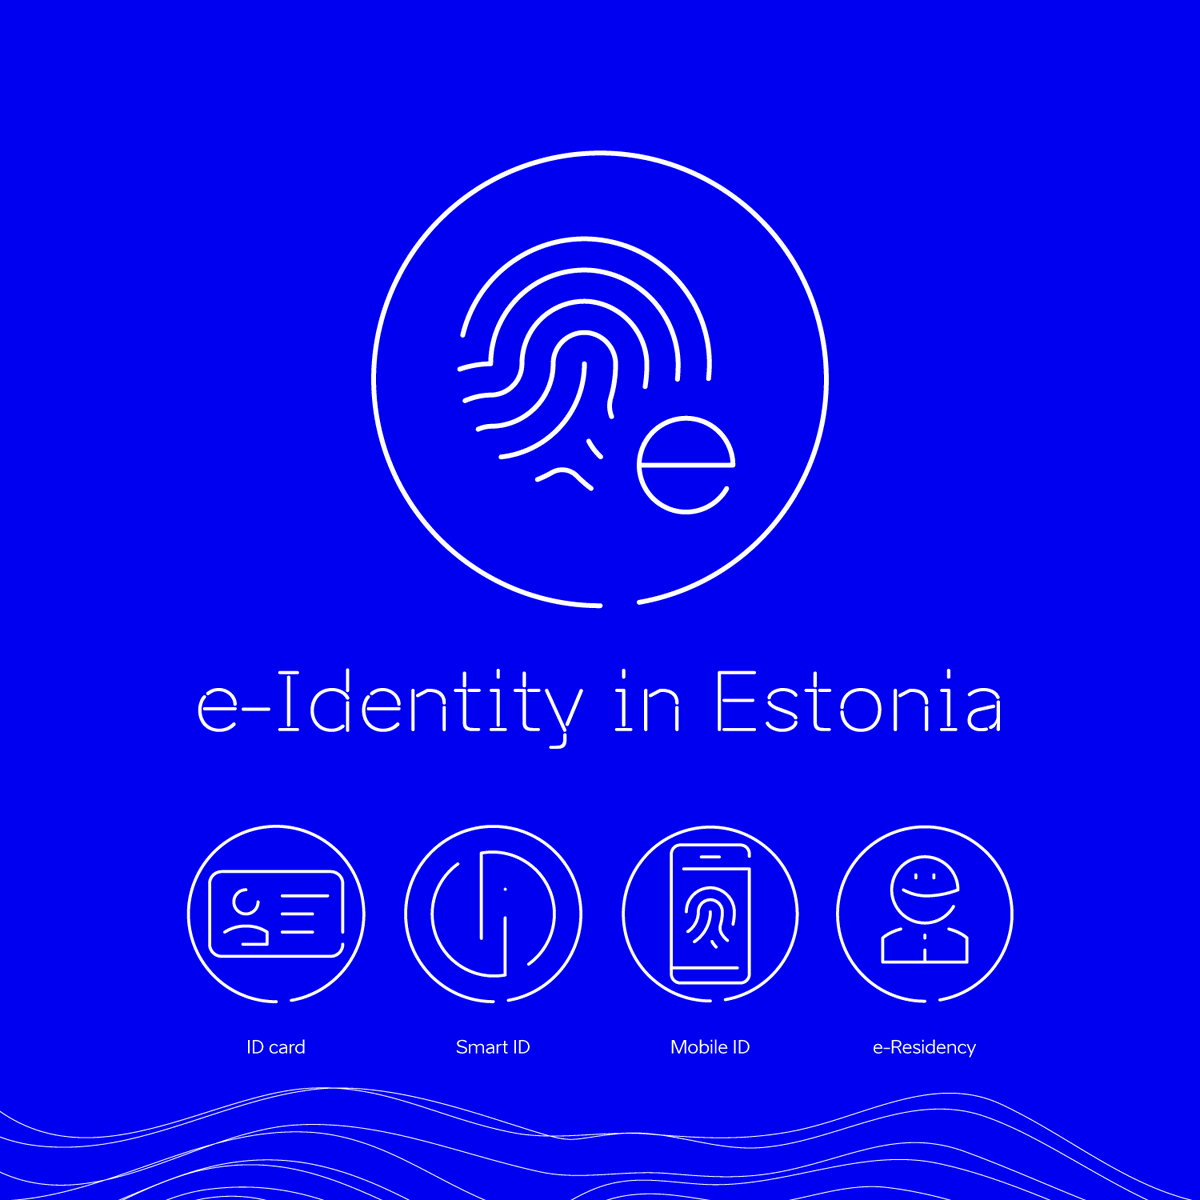 #Estonia has by far the most highly-developed e-ID system in the world. All Estonians are issued a #digitalidentity by the state.

Check out more about the features of e-ID at @e_estonia and why Estonia is one of the world's top #digitalsocieties!

#eEstonia #EstoniaInSingapore